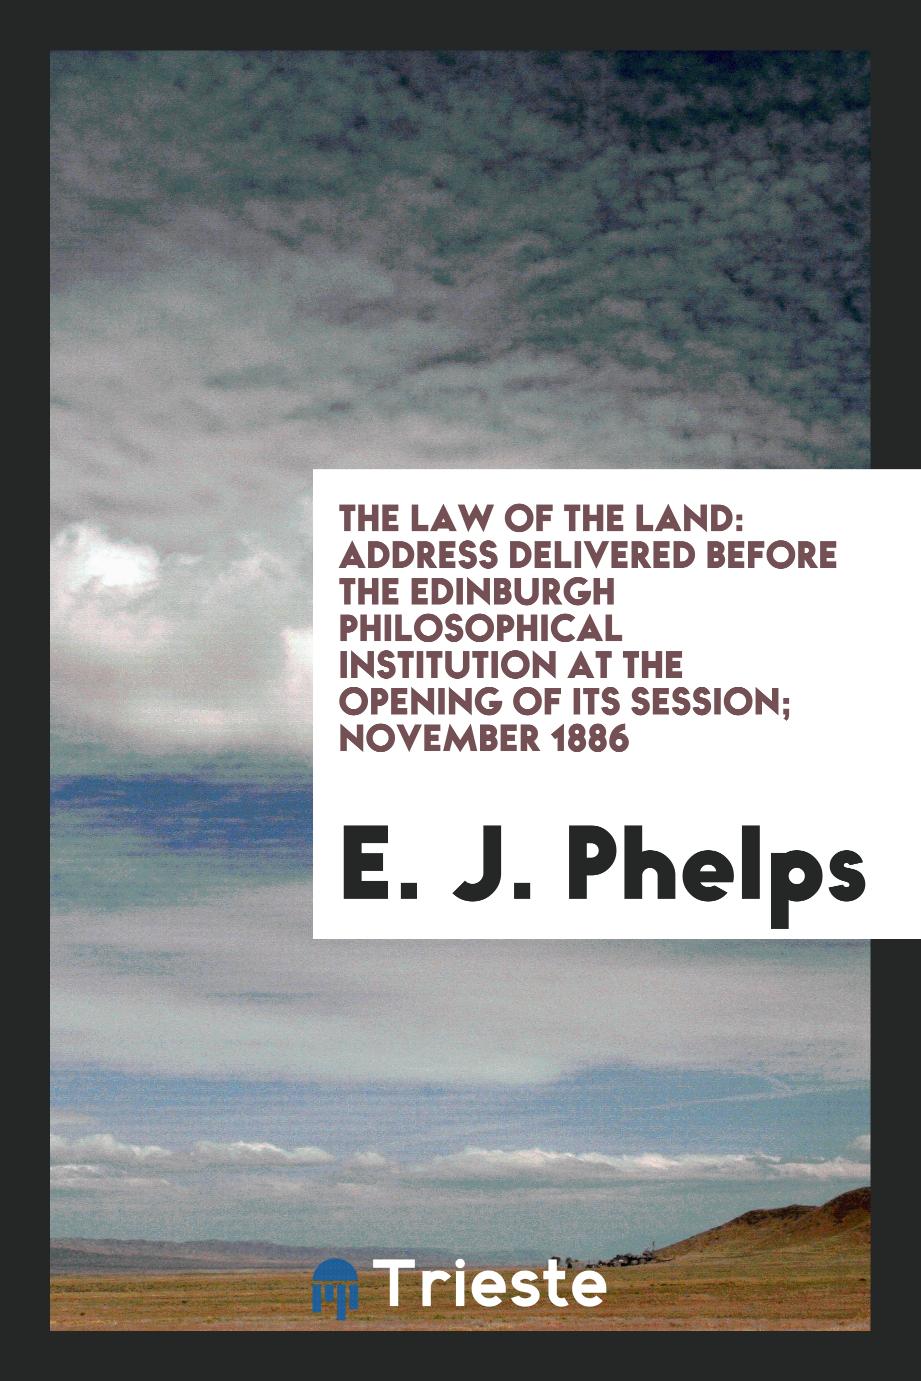 The Law of the Land: Address delivered before the Edinburgh Philosophical Institution at the opening of its session; November 1886